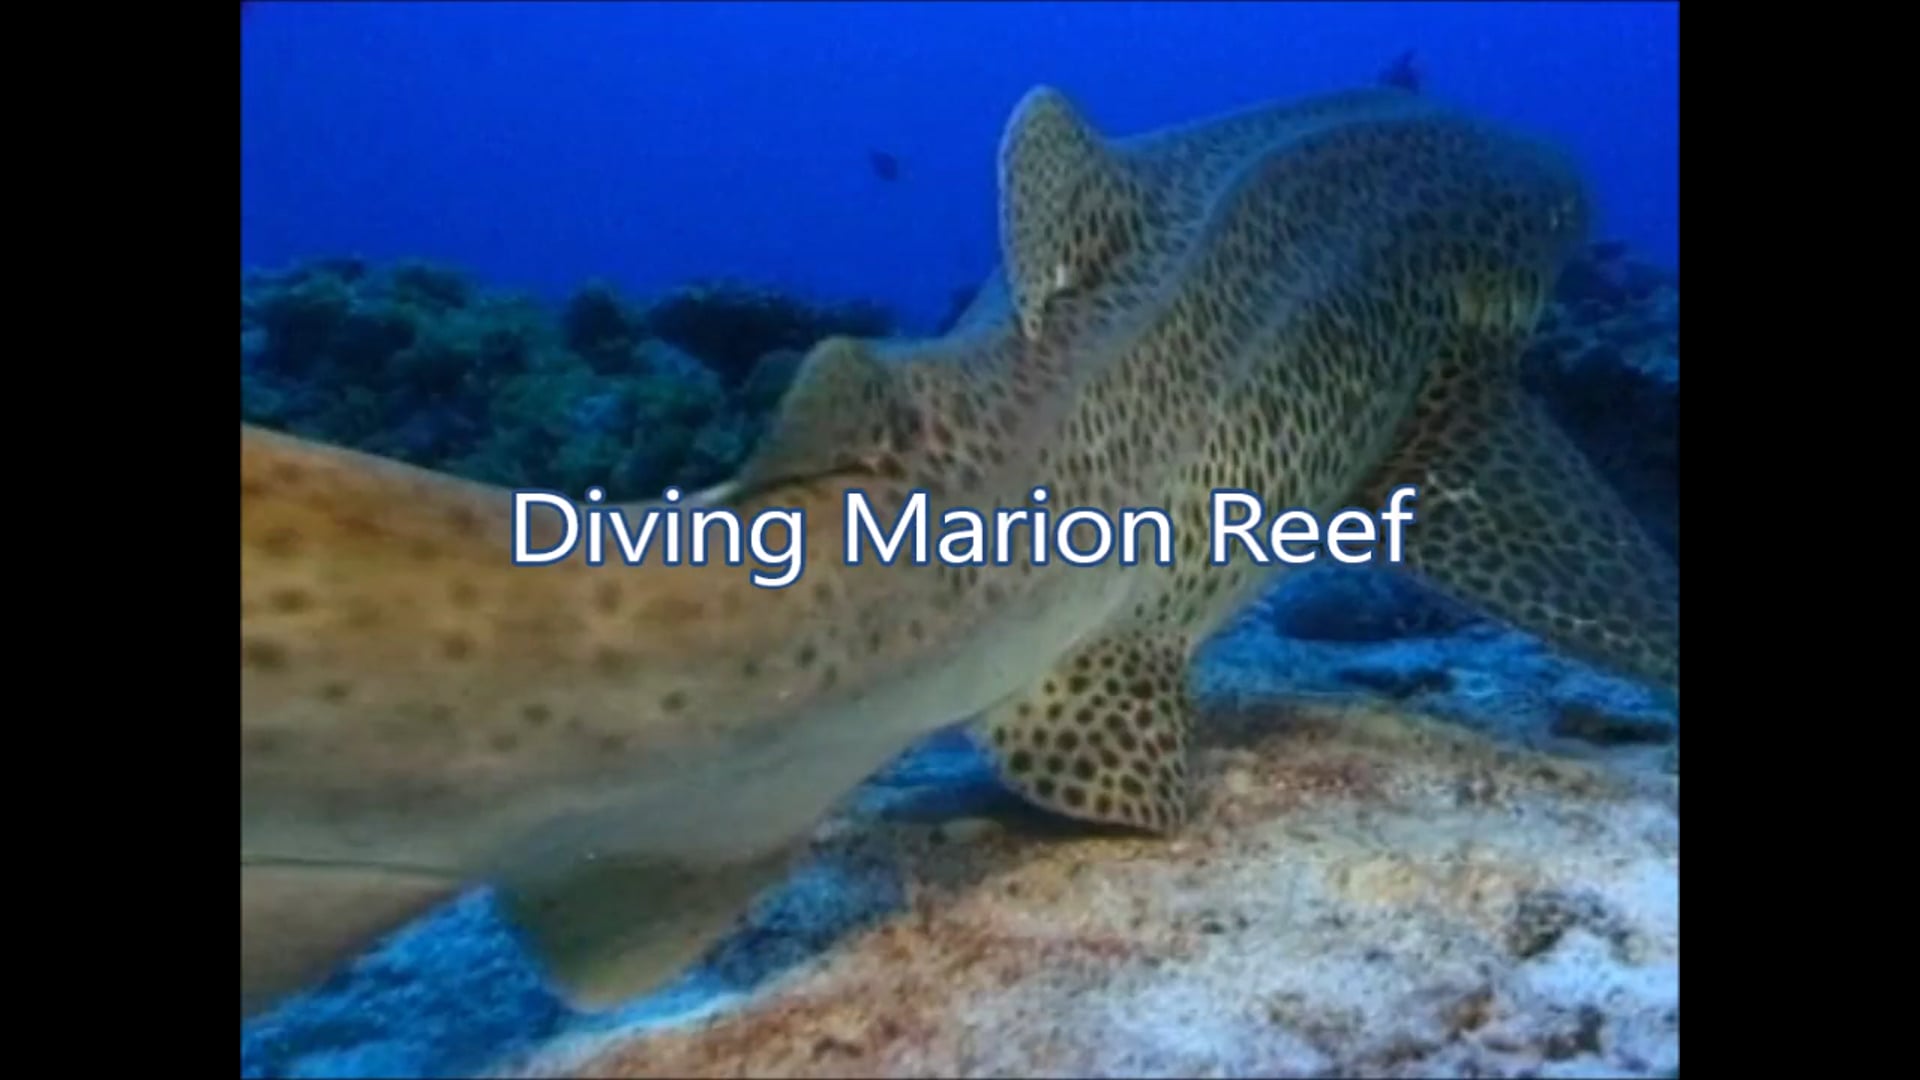 Diving Marion Reef